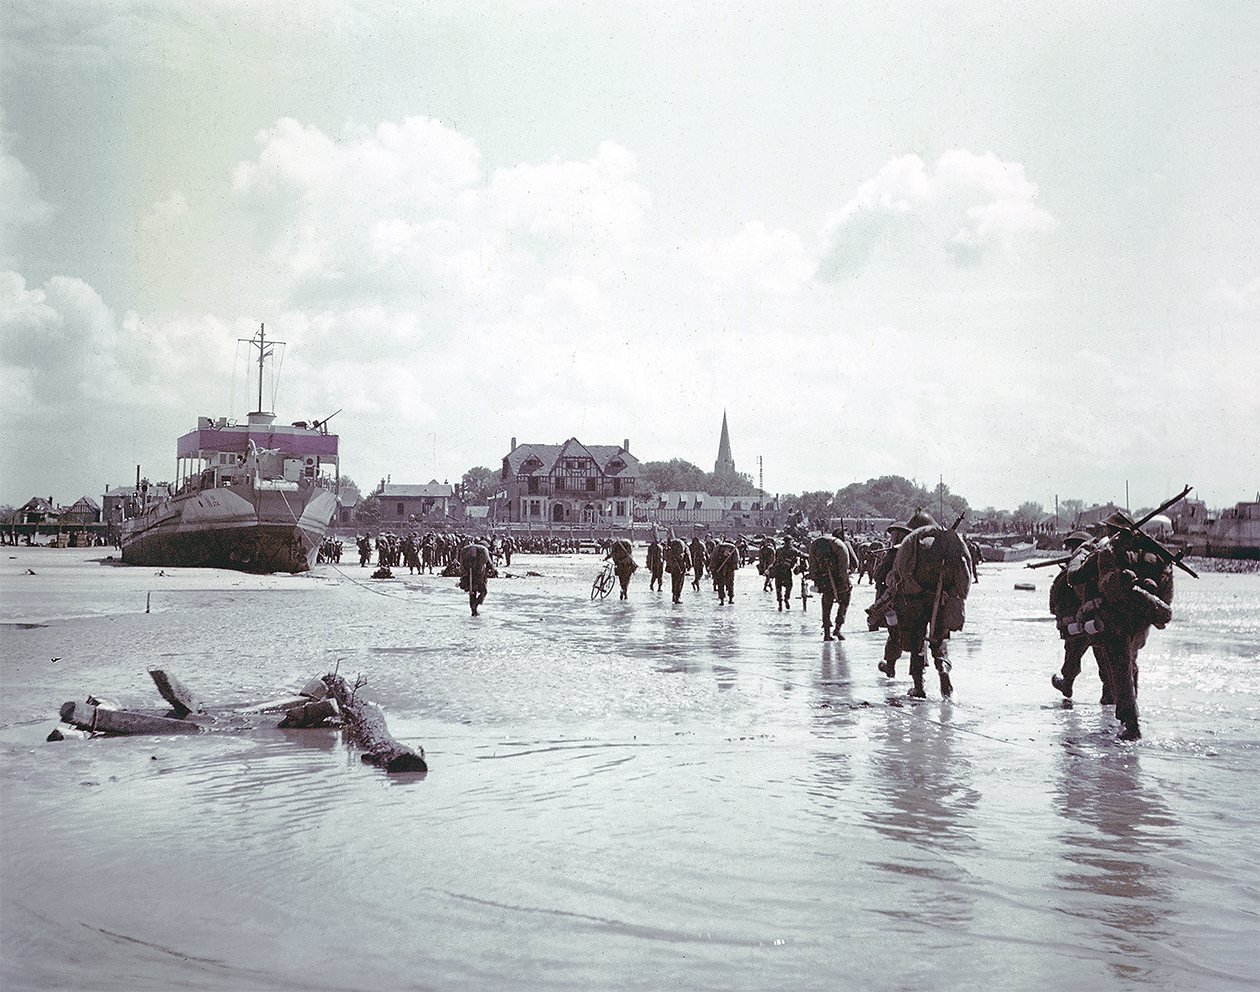 What militaries were involved in the D-Day invasions during World War II?